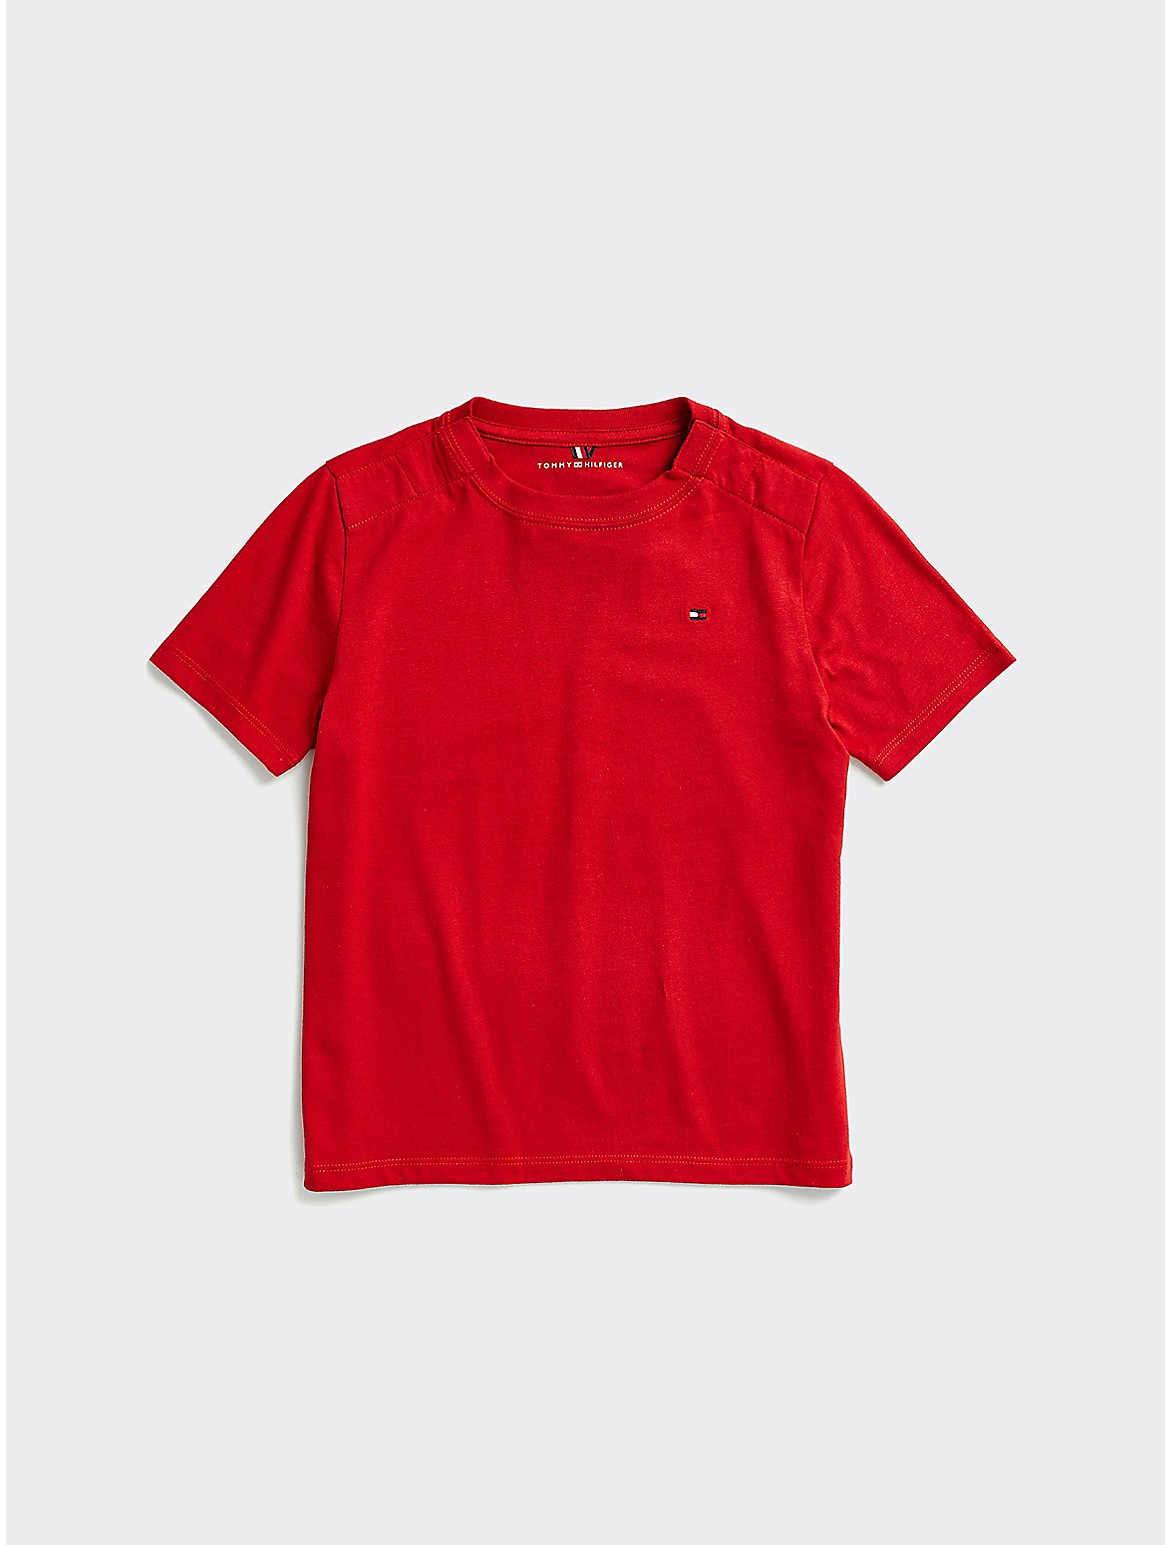 Tommy Hilfiger Boys' Classic T-Shirt - Red - S